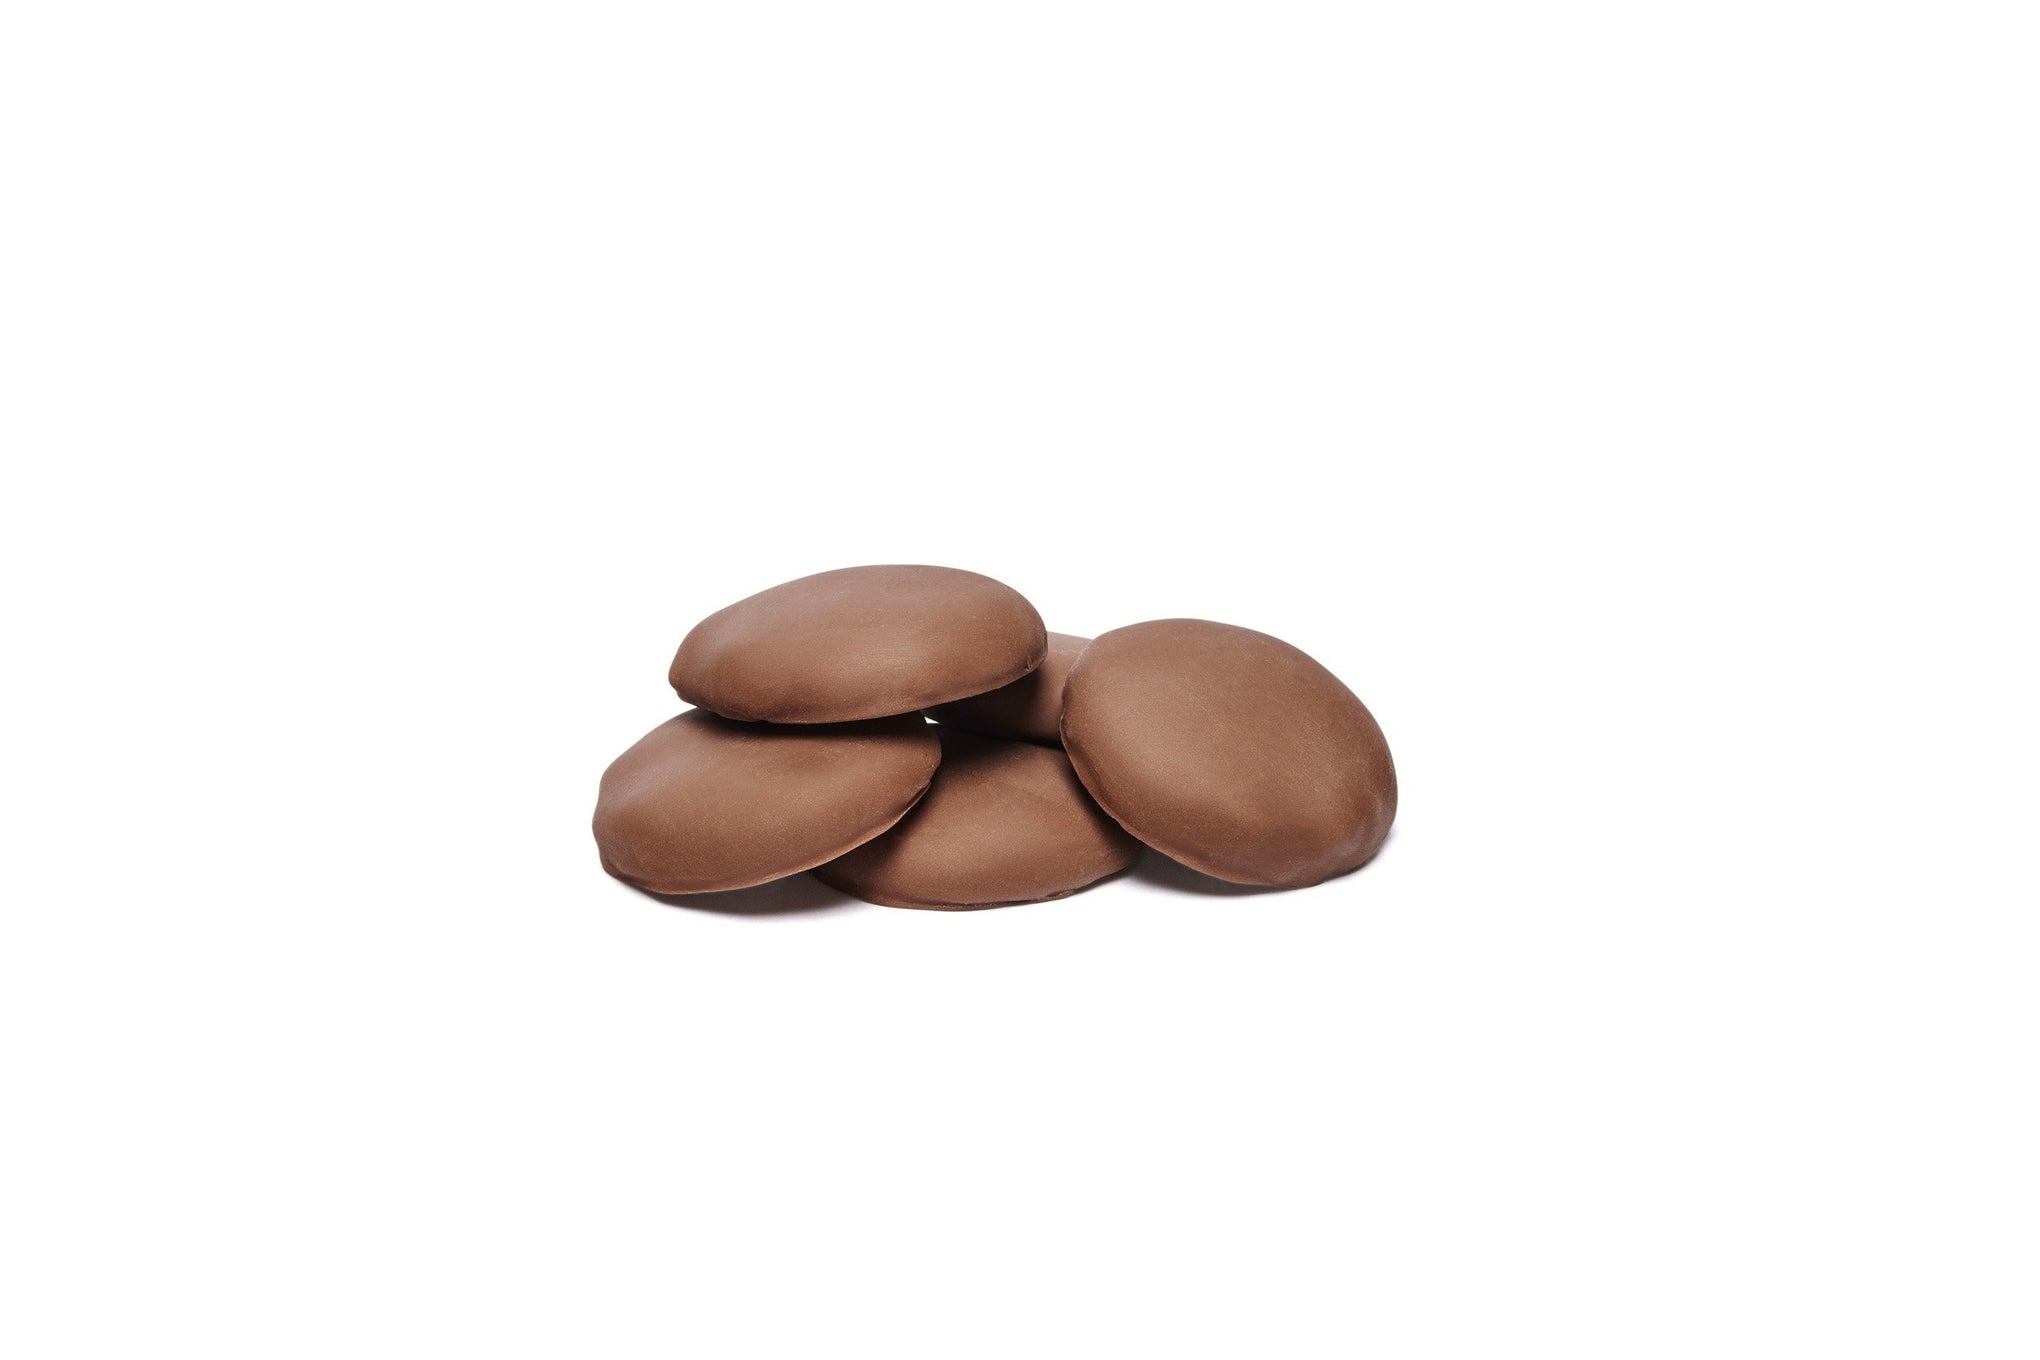 Chocolate rounds stacked together